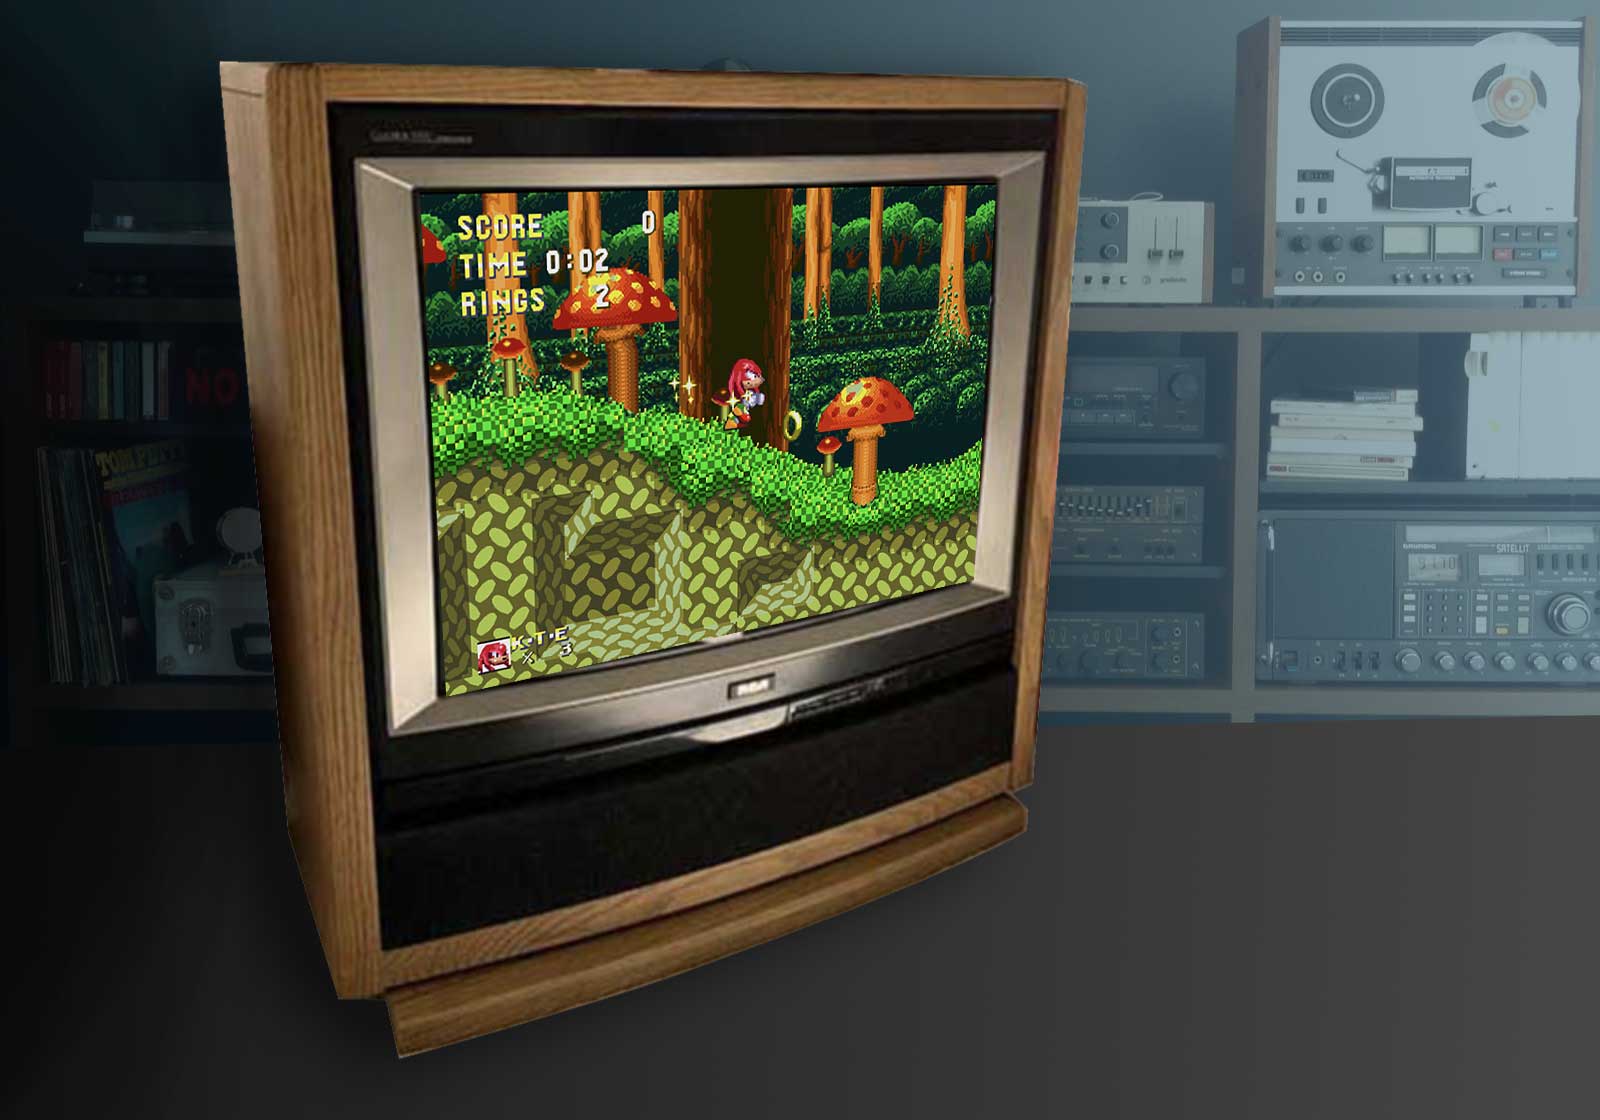 Why I Didn't Buy This Cool CRT TV Setup and How You Should Learn From It -  RetroGaming with Racketboy